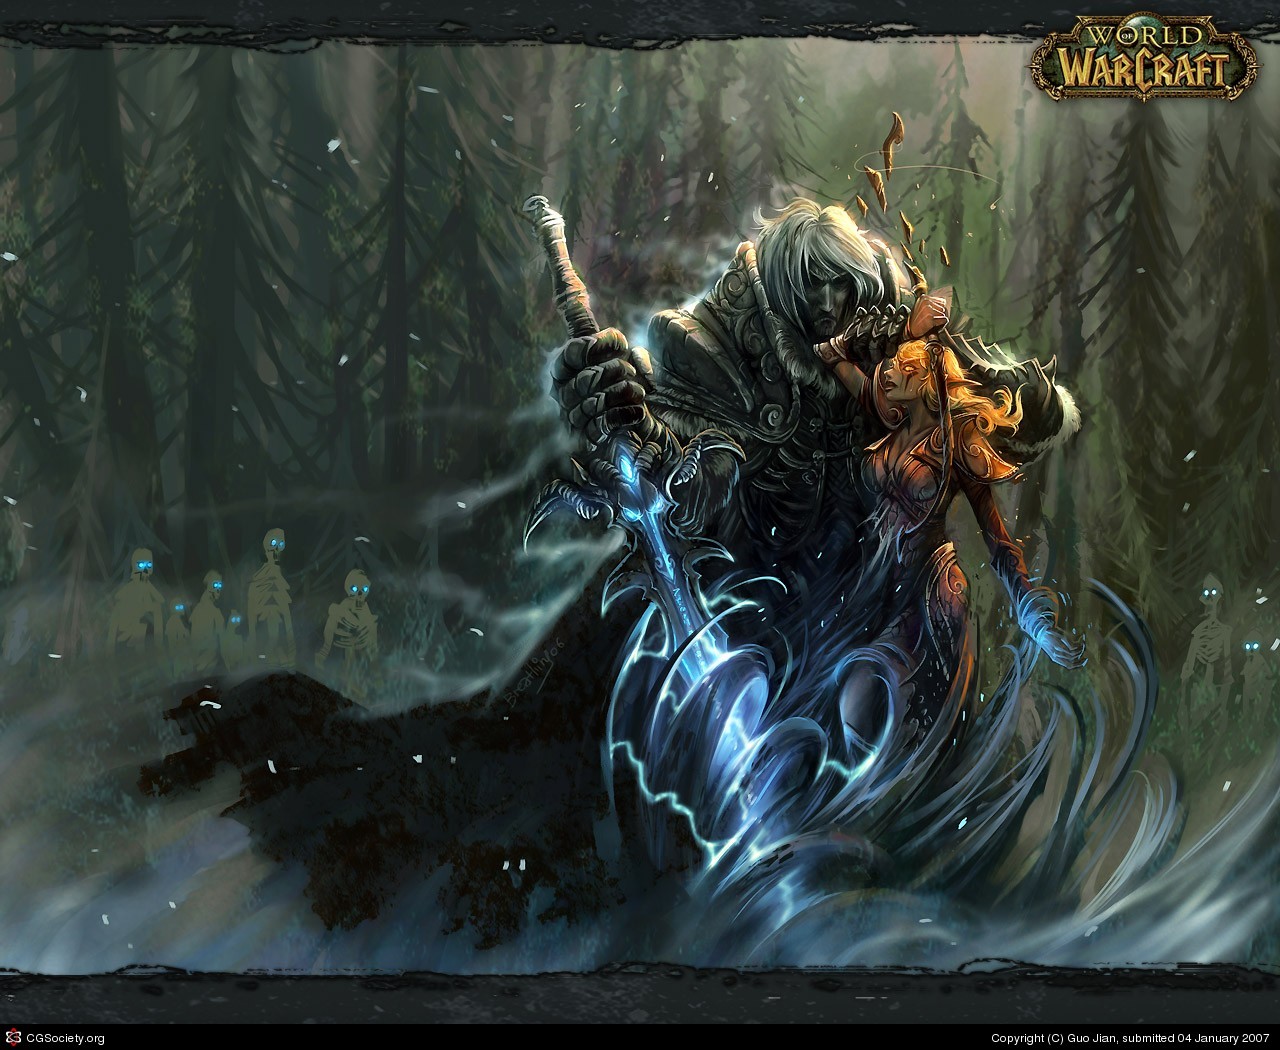 General 1280x1050 World of Warcraft Lich King 2007 (Year) Blizzard Entertainment video game art PC gaming fantasy art